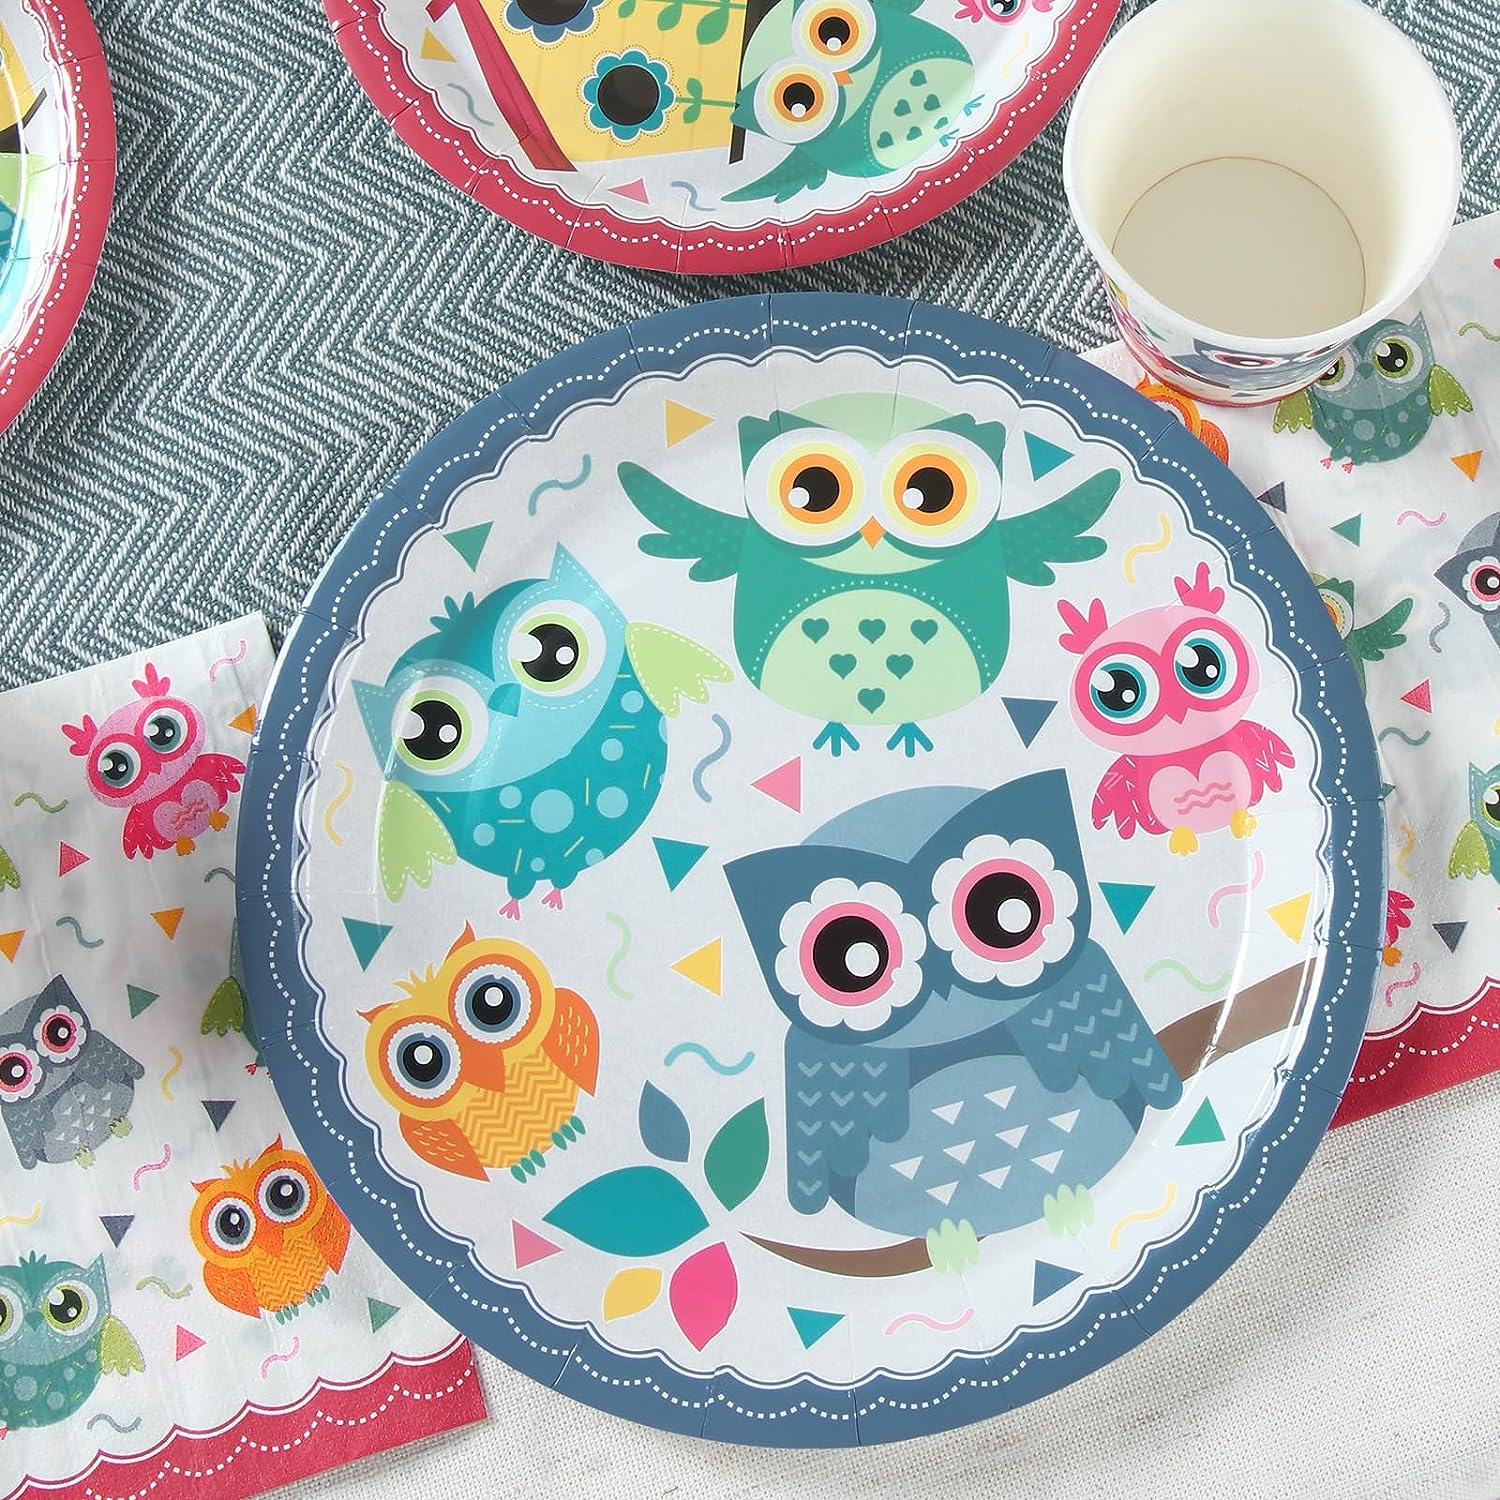 Patchwork Owl Birthday Plates, Cups and Napkins (Serves 24)